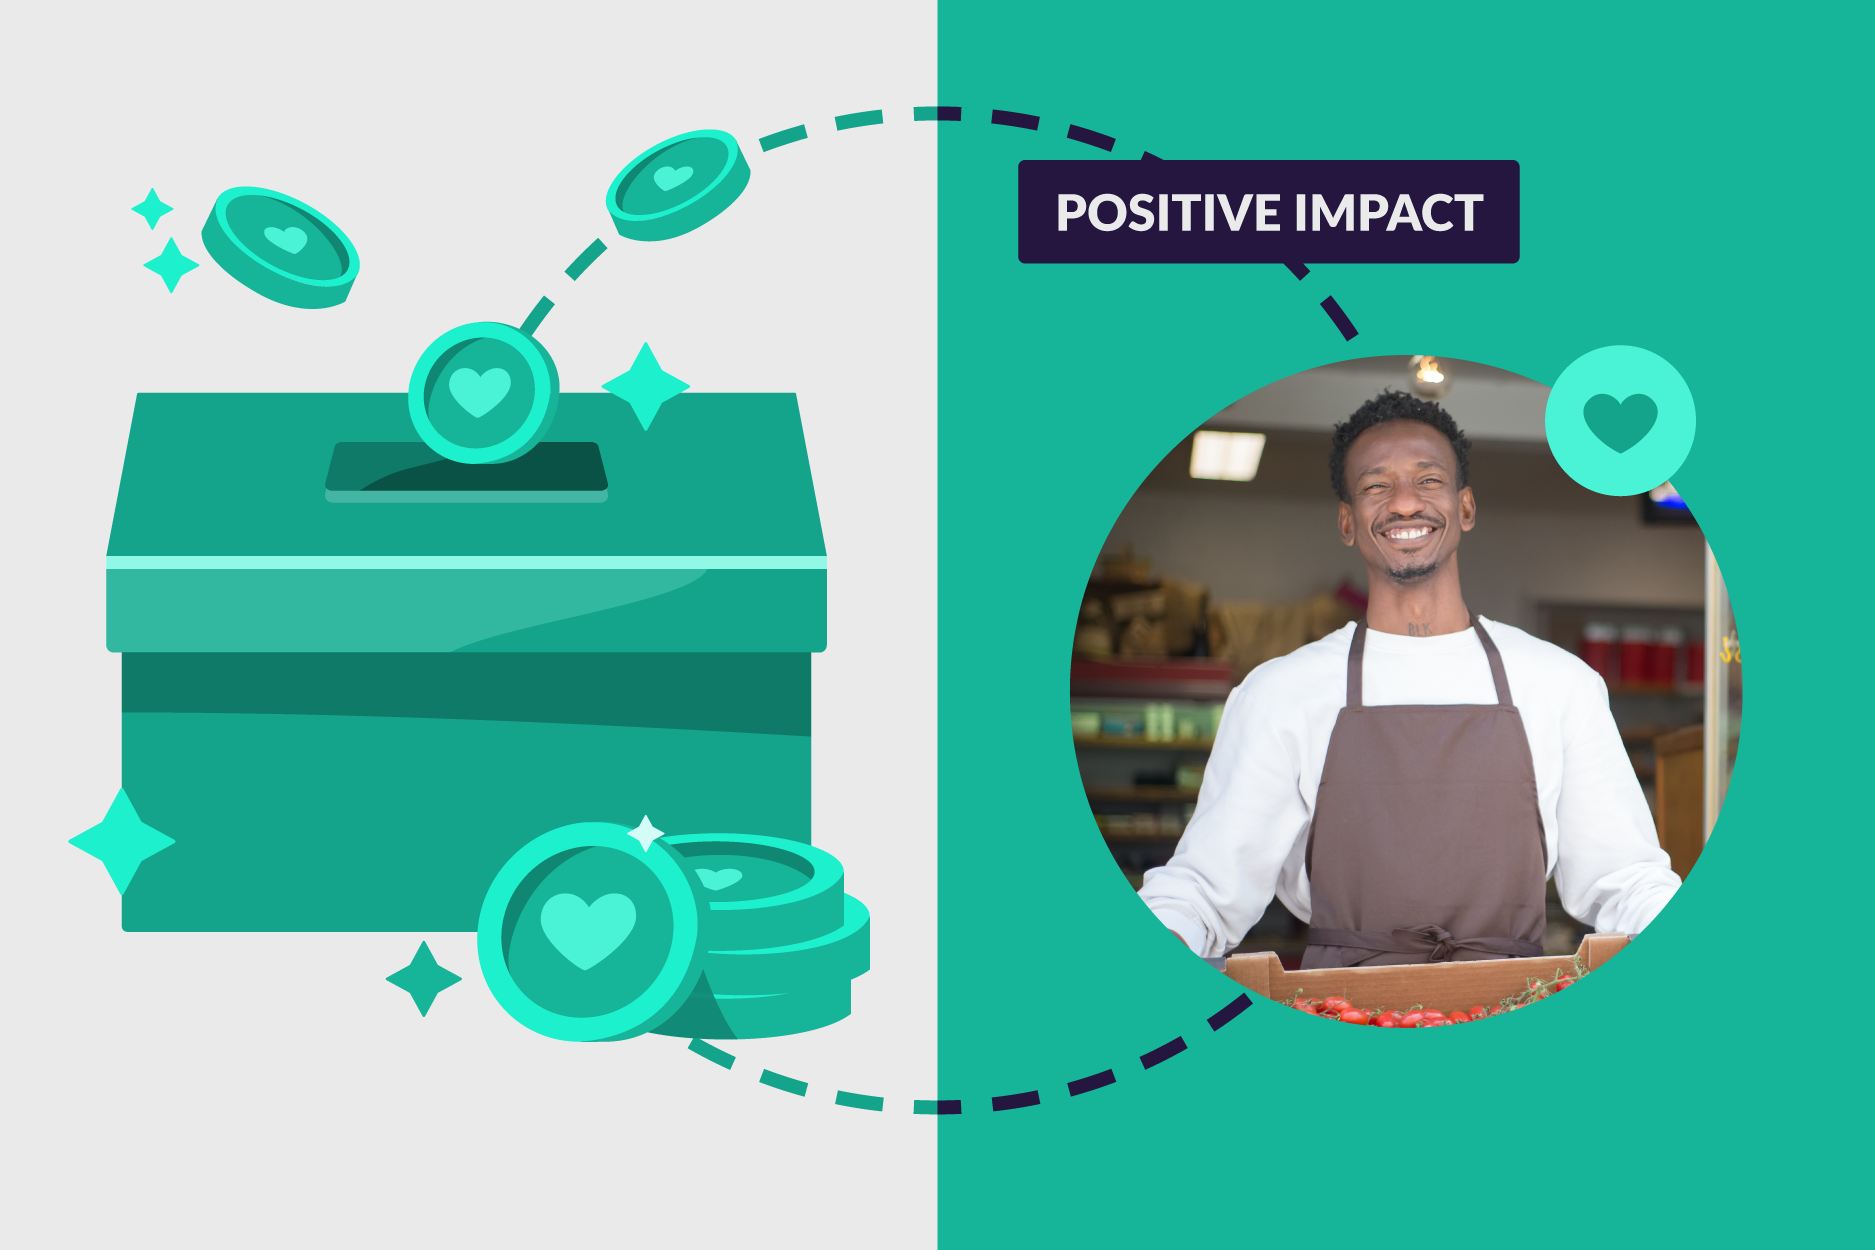 Illustration of a donations box with heart coins dropping in - opposite a smiling African American man working for a charitable cause